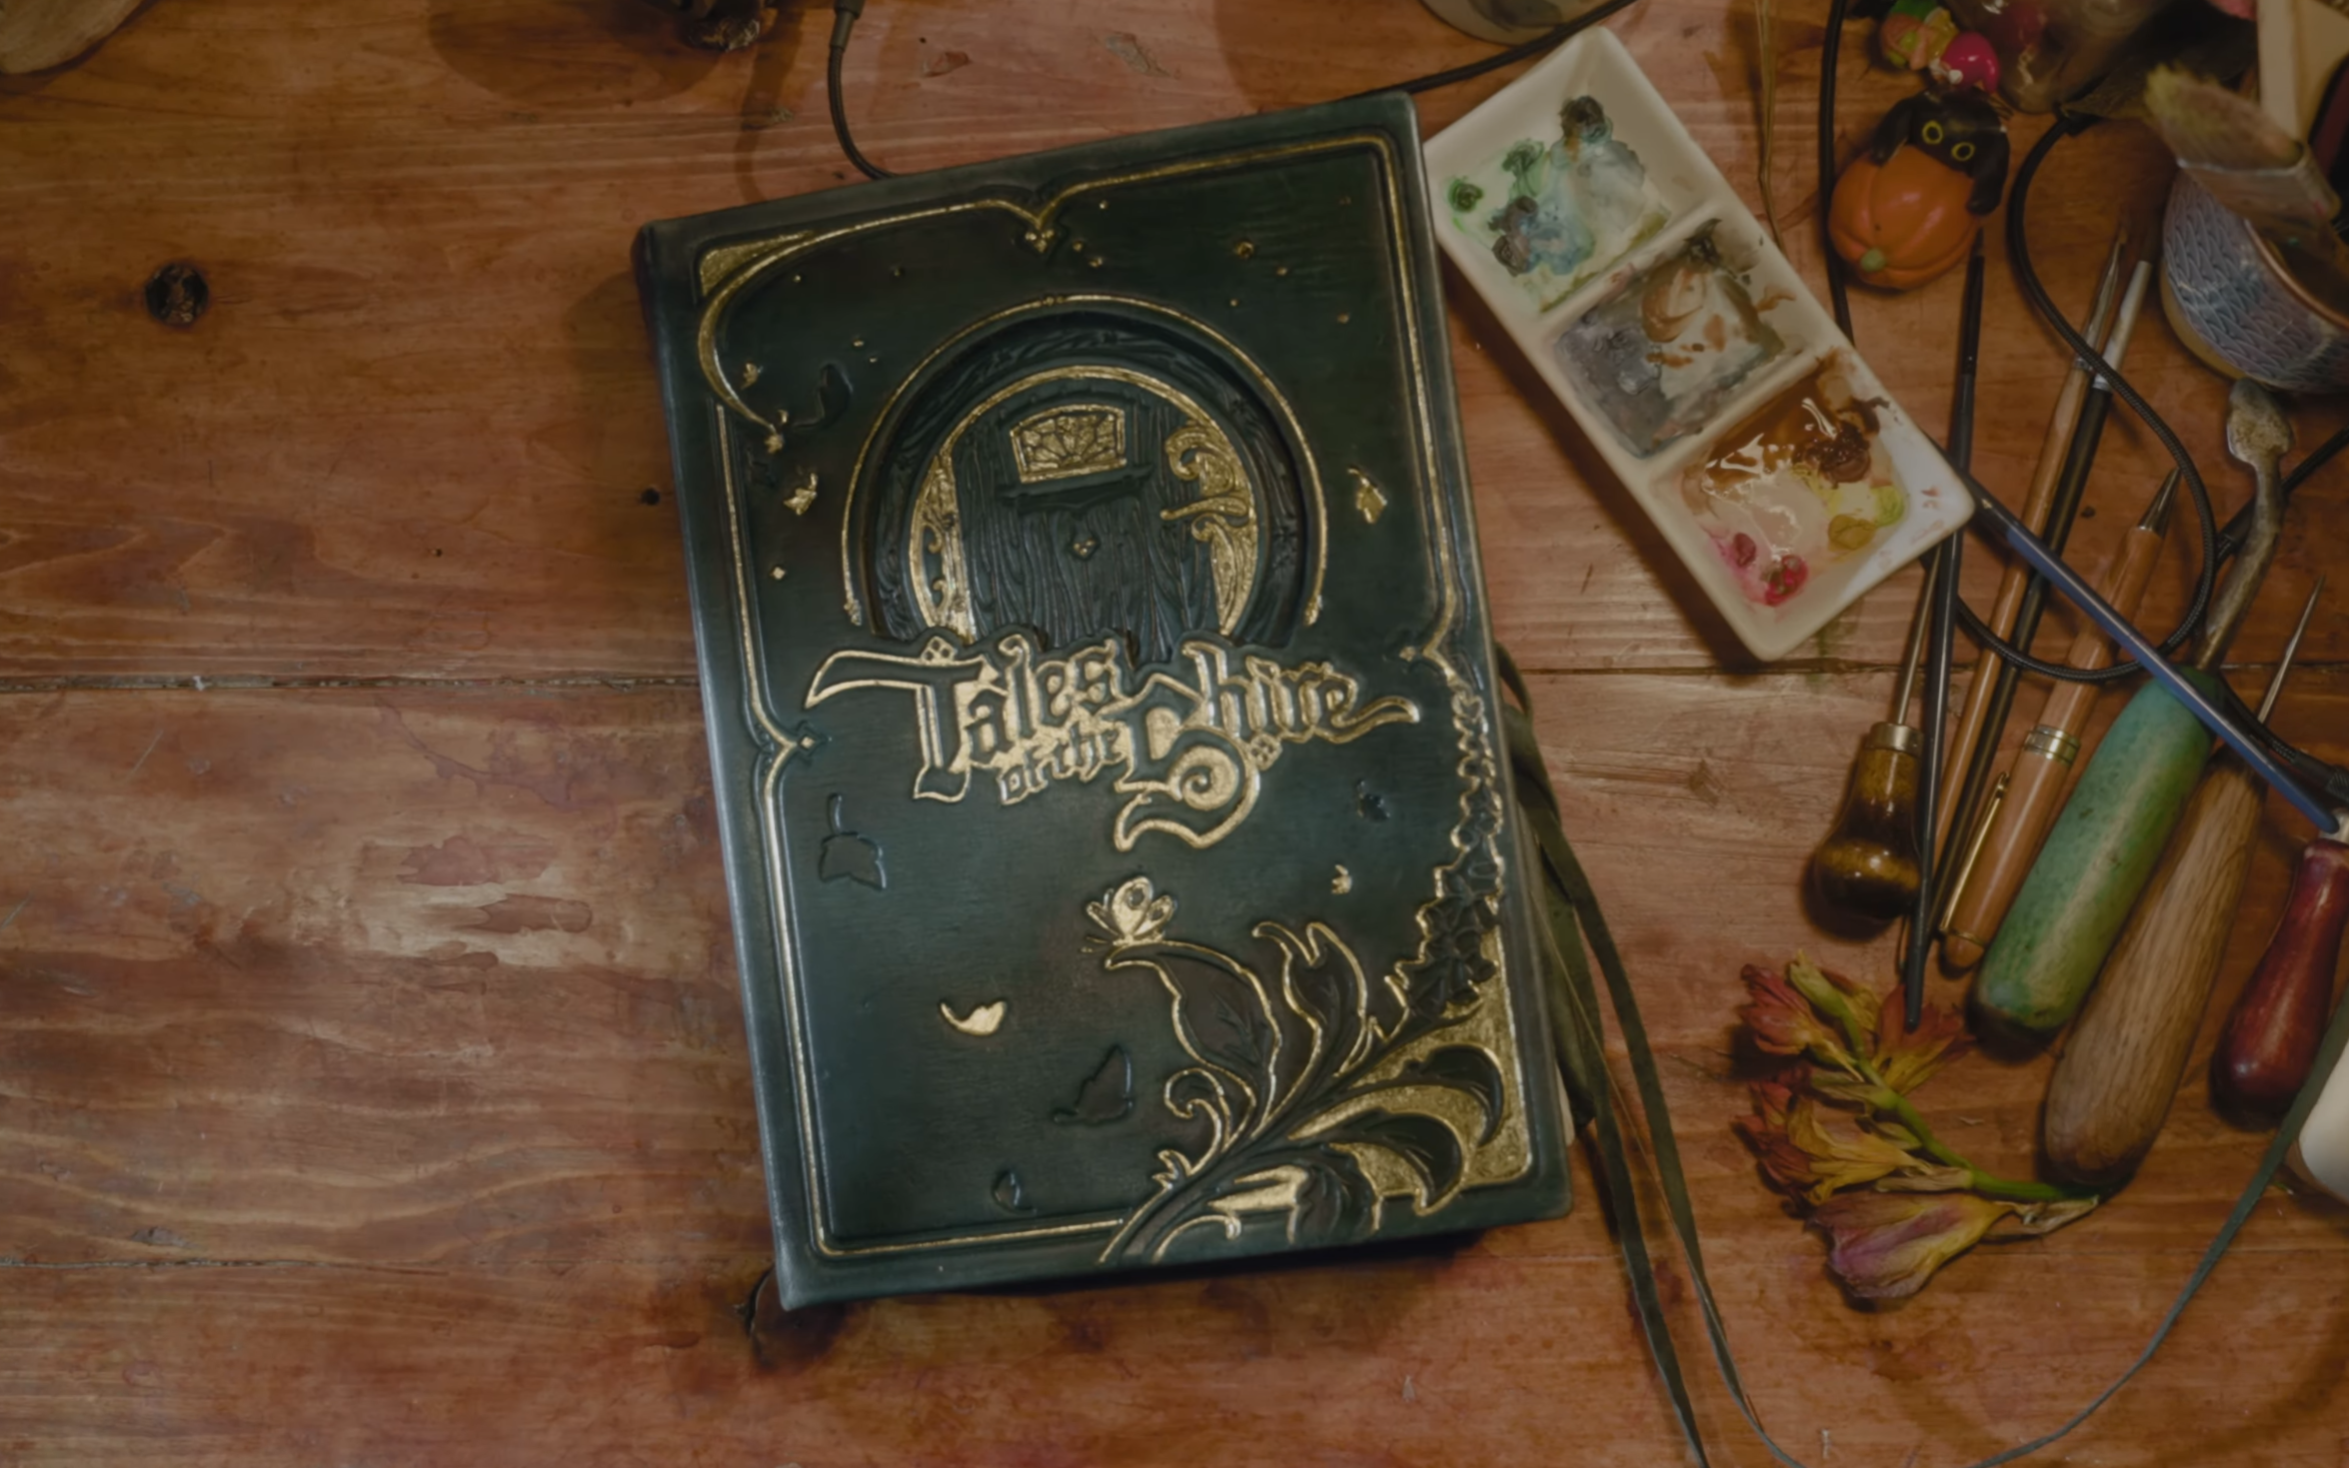 The Lord of the Rings game will receive a toy from the creators of props from the film trilogy.  Shire Tales in the trailer